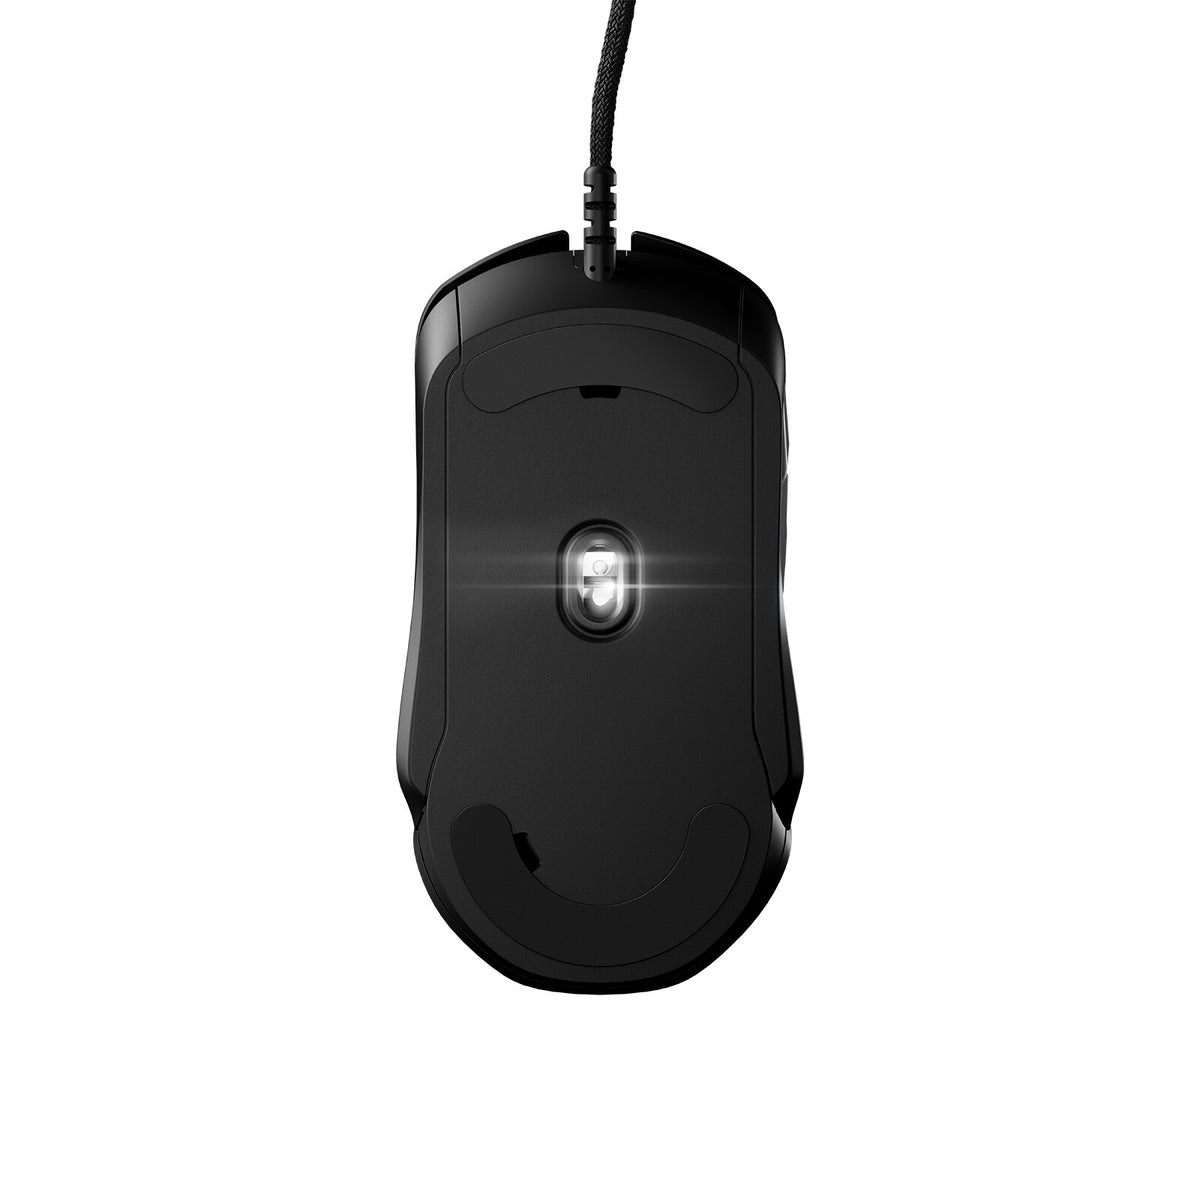 Steelseries Rival 5 - Wired USB Type-A Optical Gaming Mouse in Black / Grey - 18,000 DPI